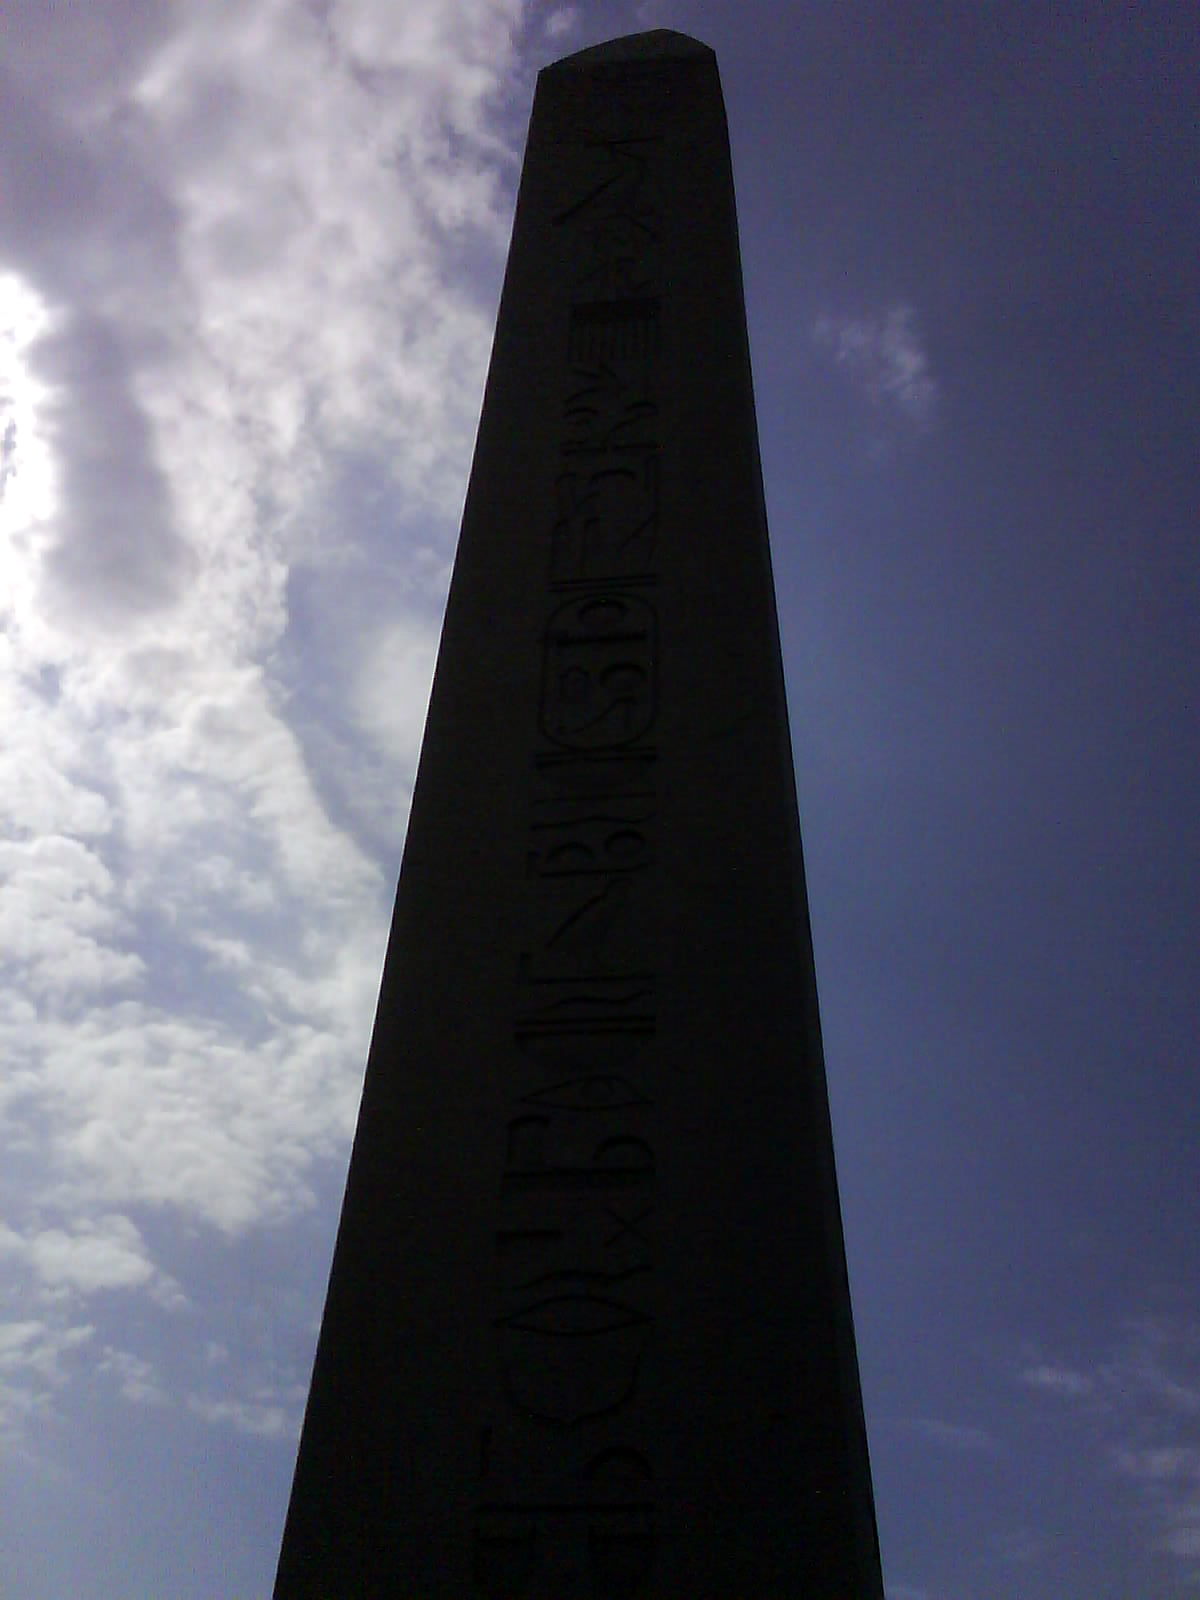 a very tall black monument with a sky background